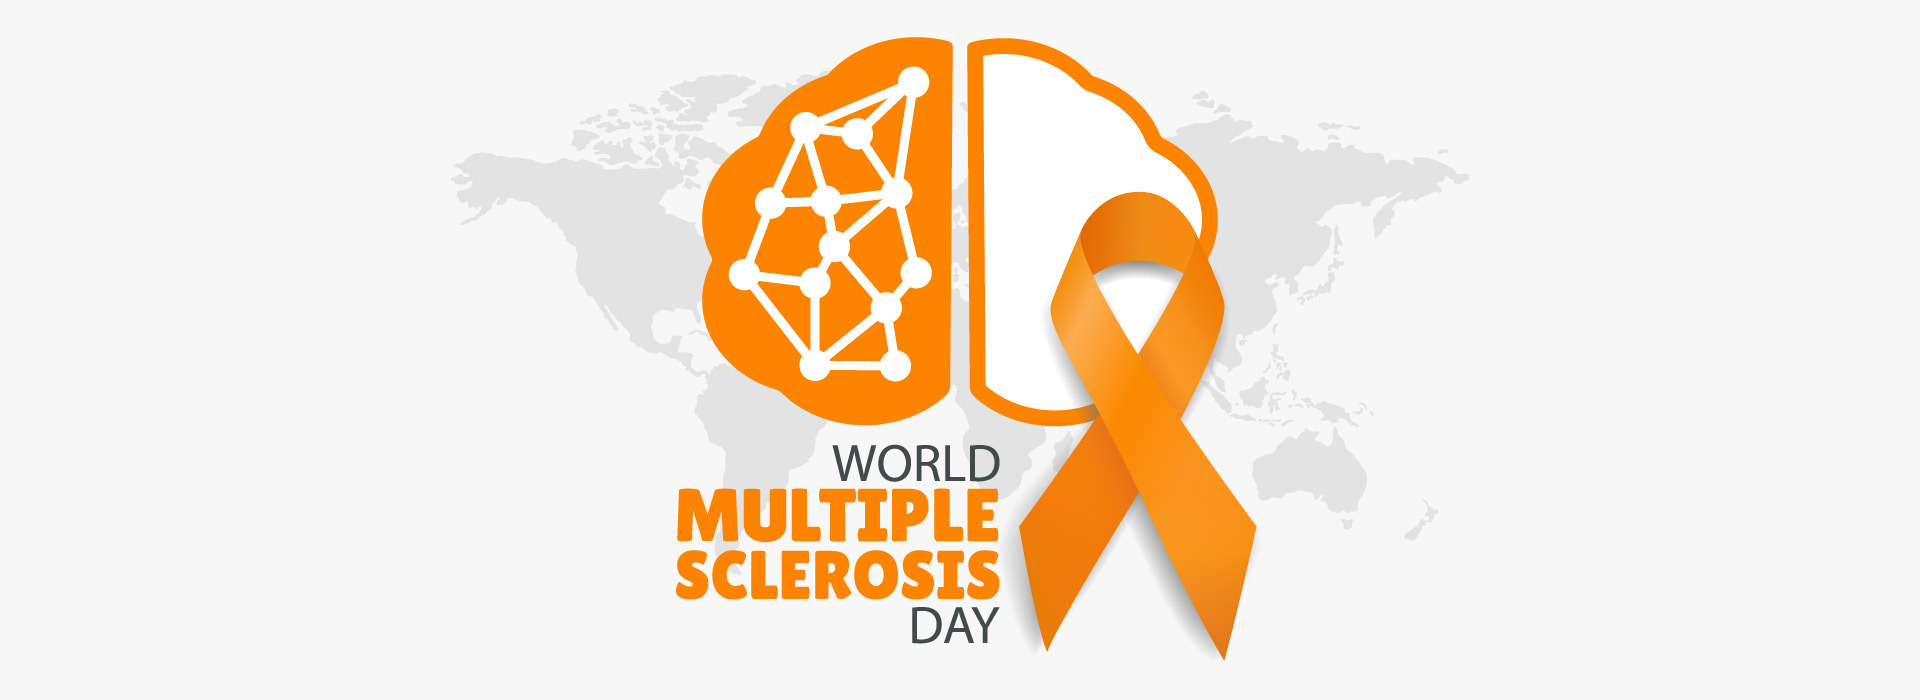 World Multiple Sclerosis Day: Spreading Awareness and Support